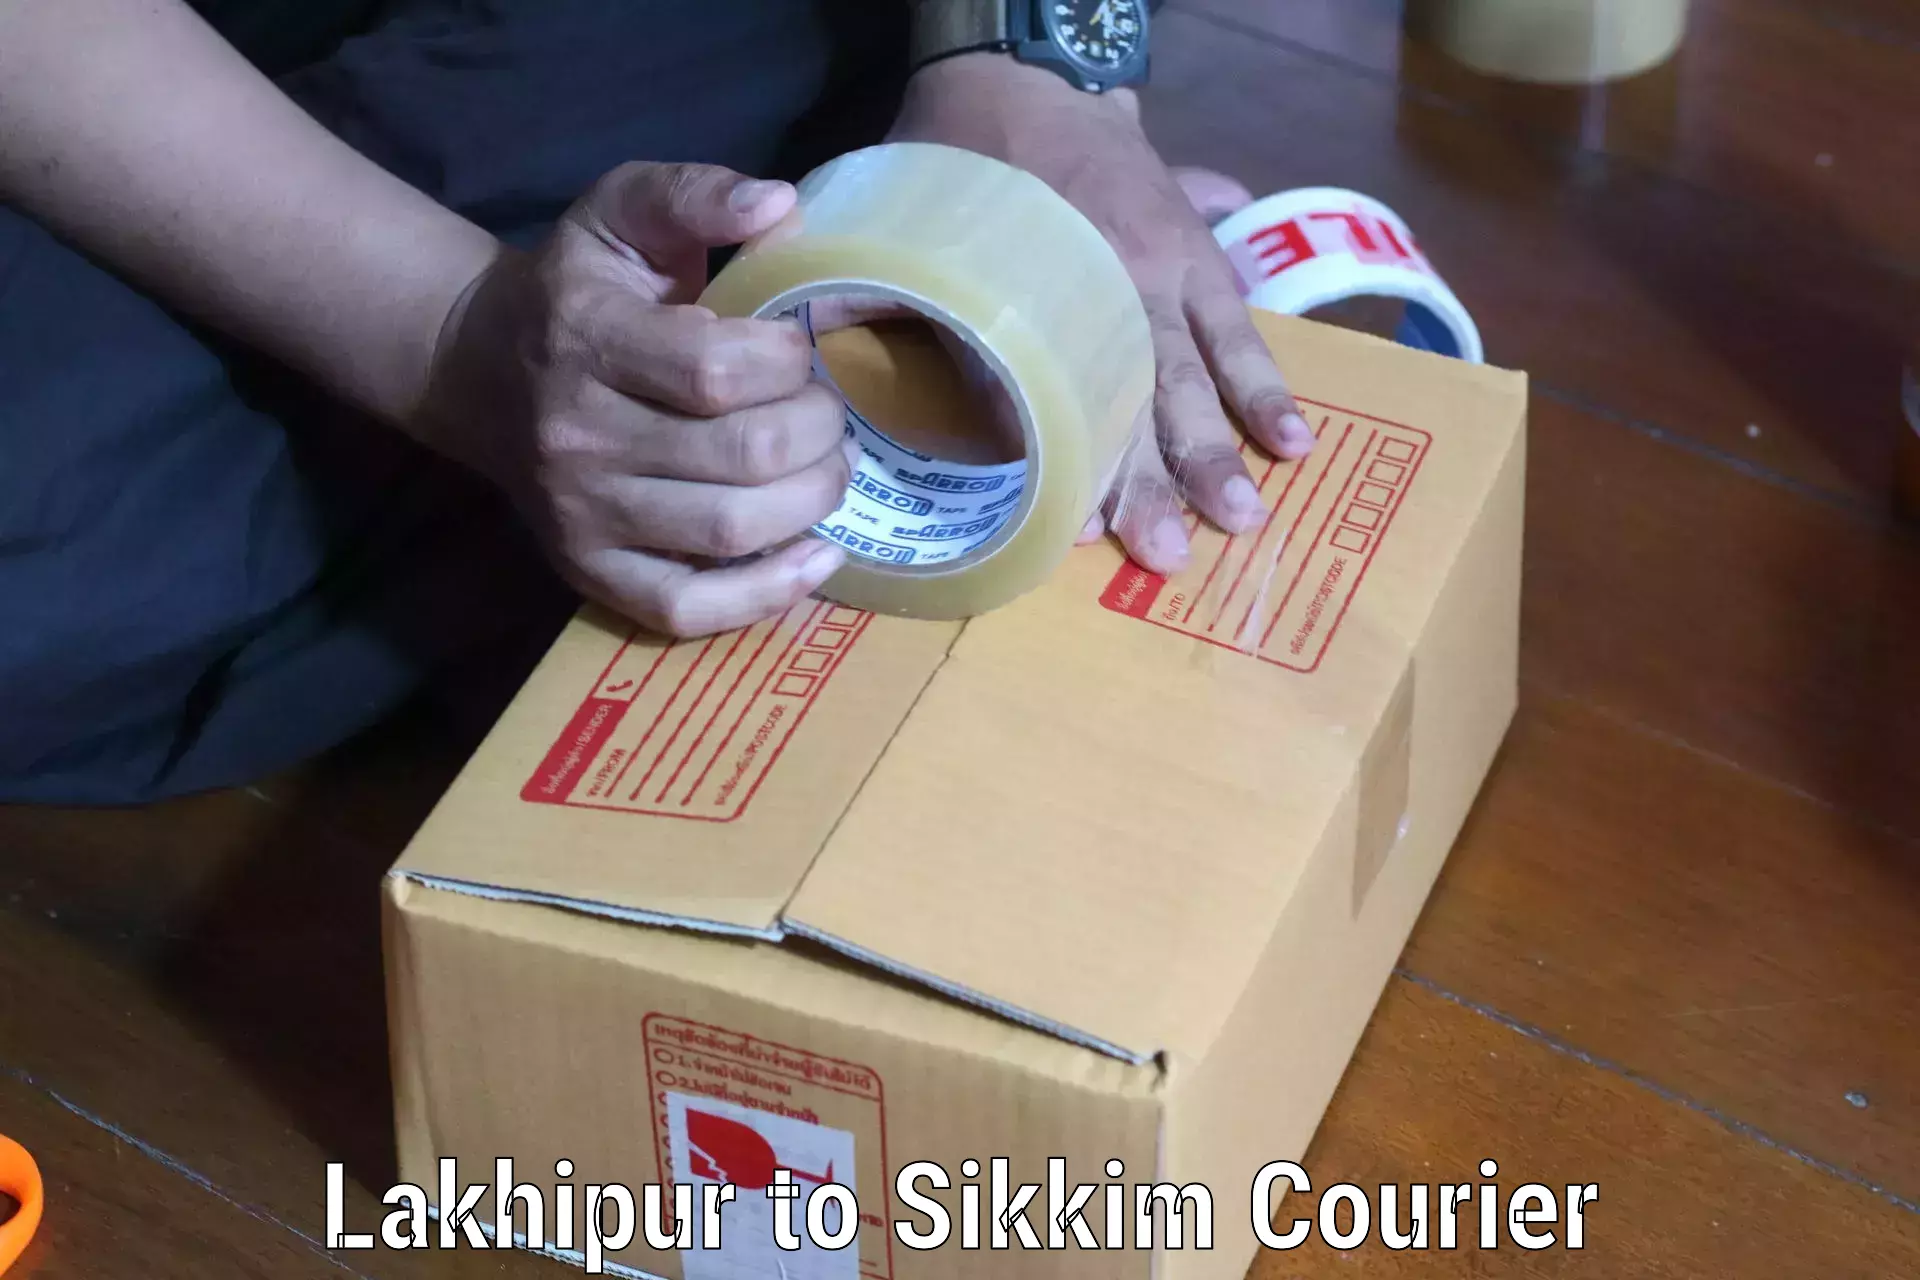 On-demand shipping options Lakhipur to Jorethang